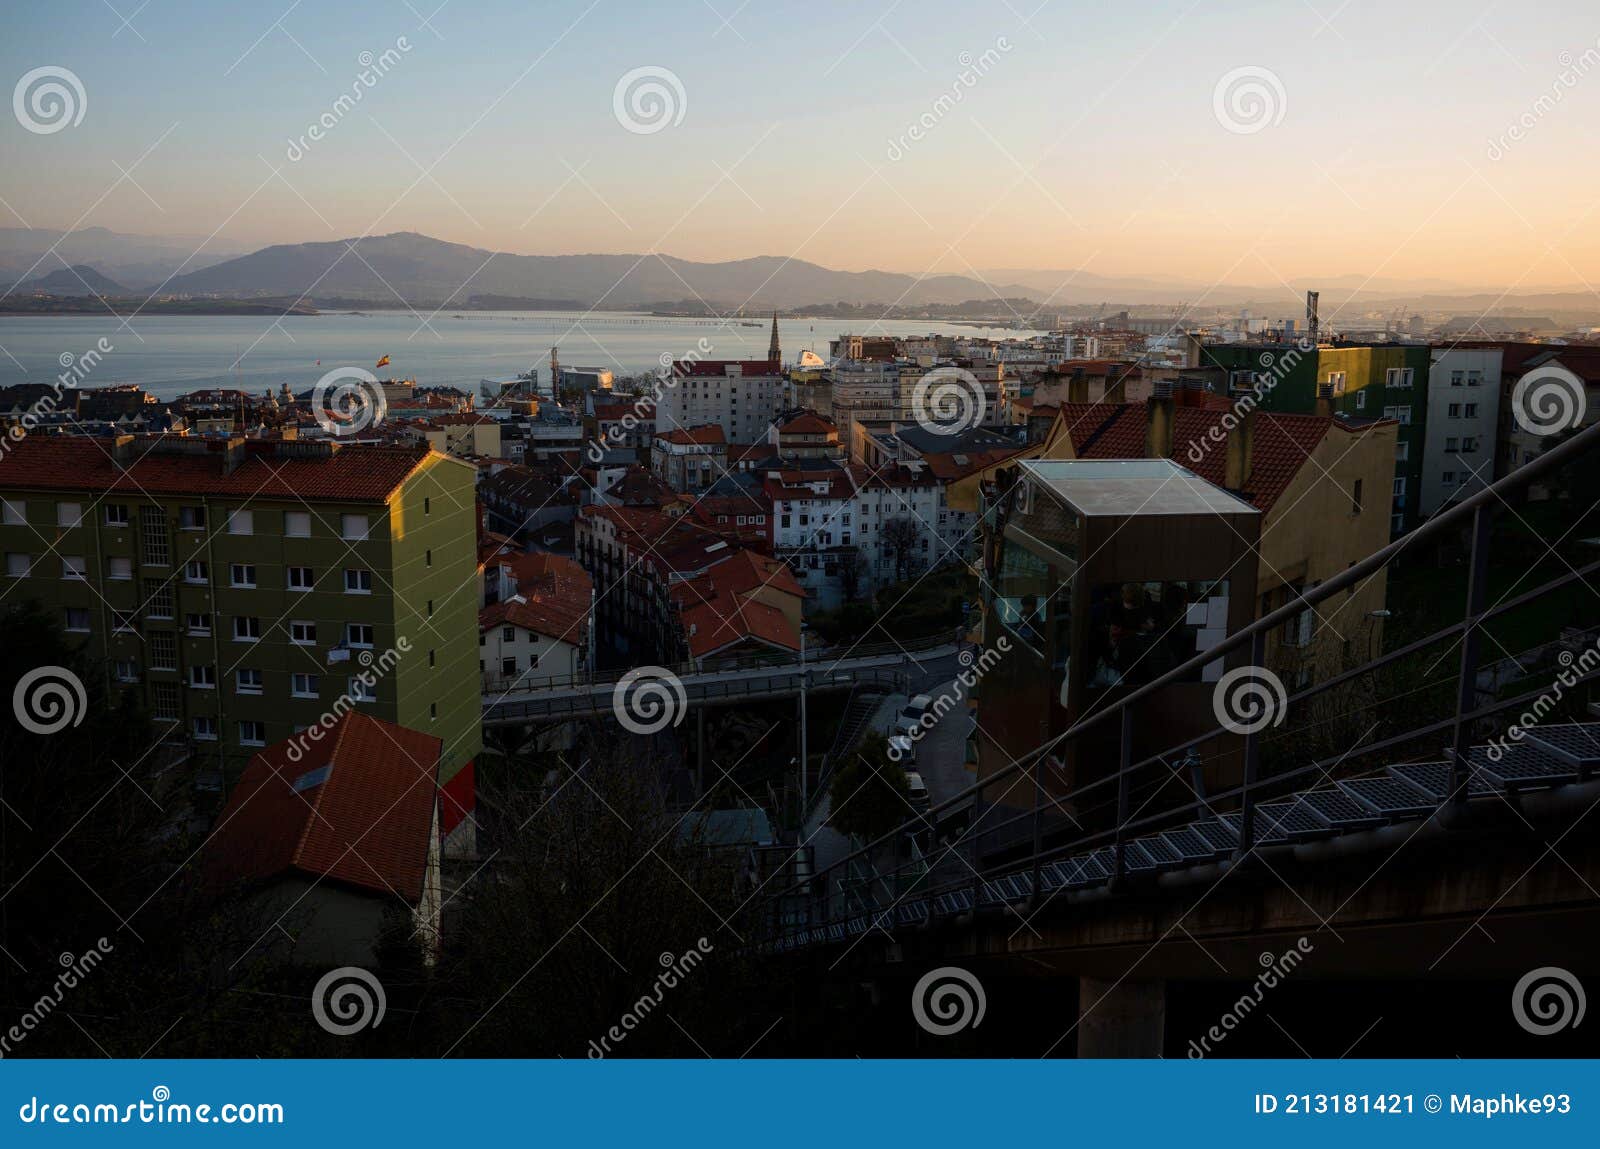 cityscape panorama sunset skyline of colorful houses buildings urban architecture in santander cantabria spain europe